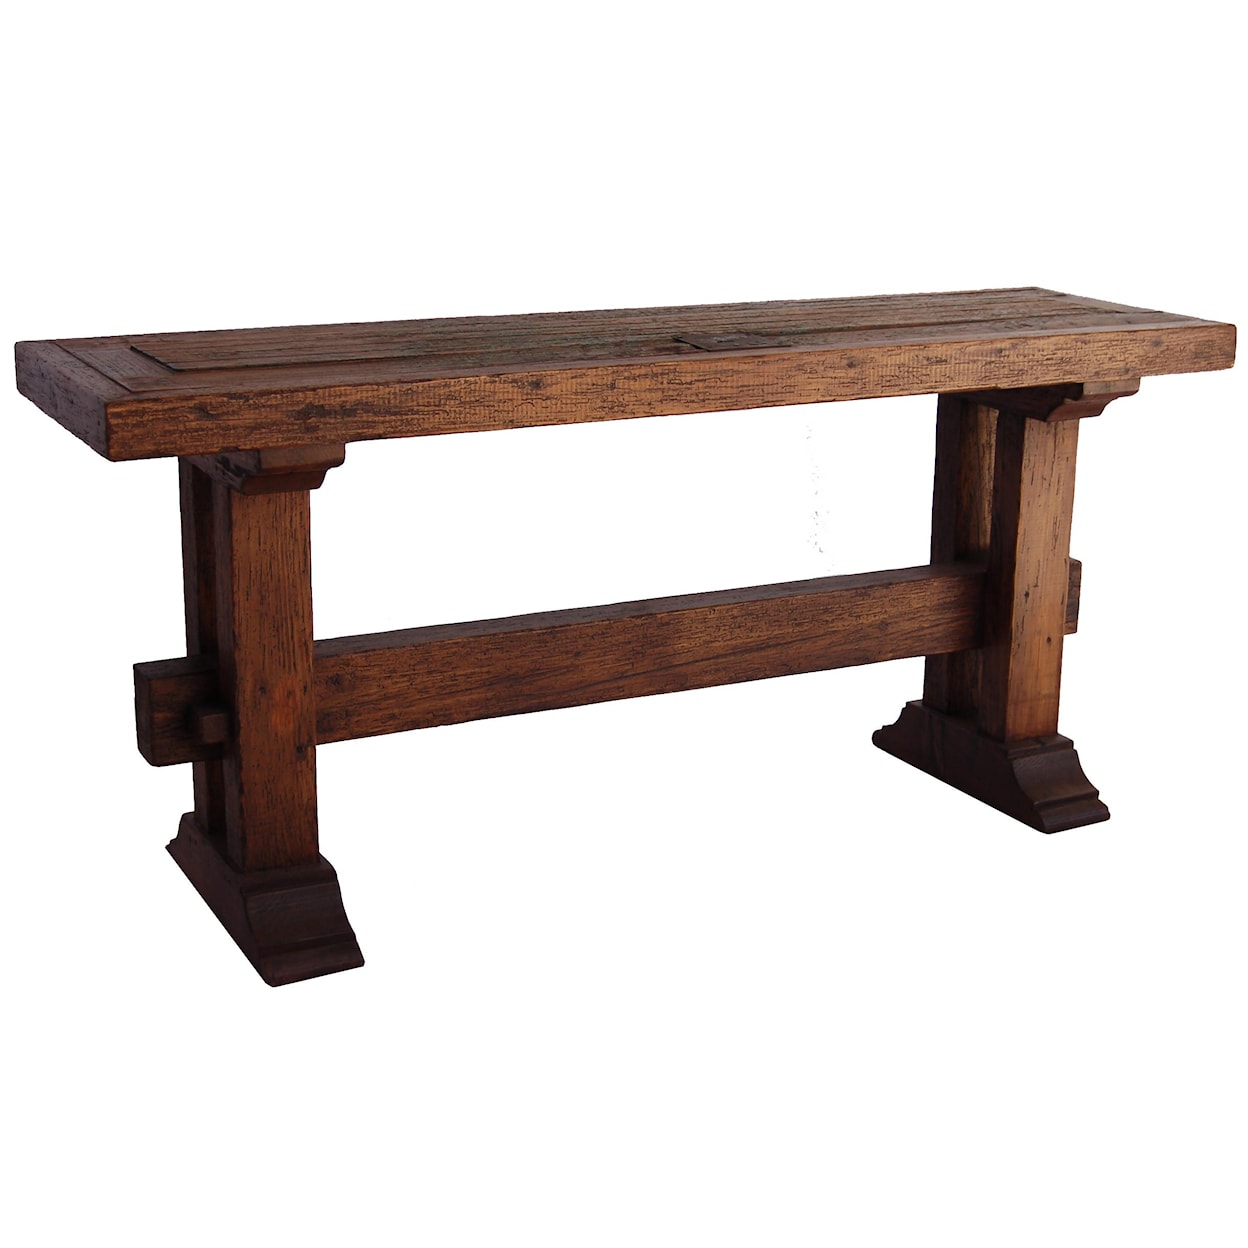 Furniture Source International Occasional Tables Trestle Console